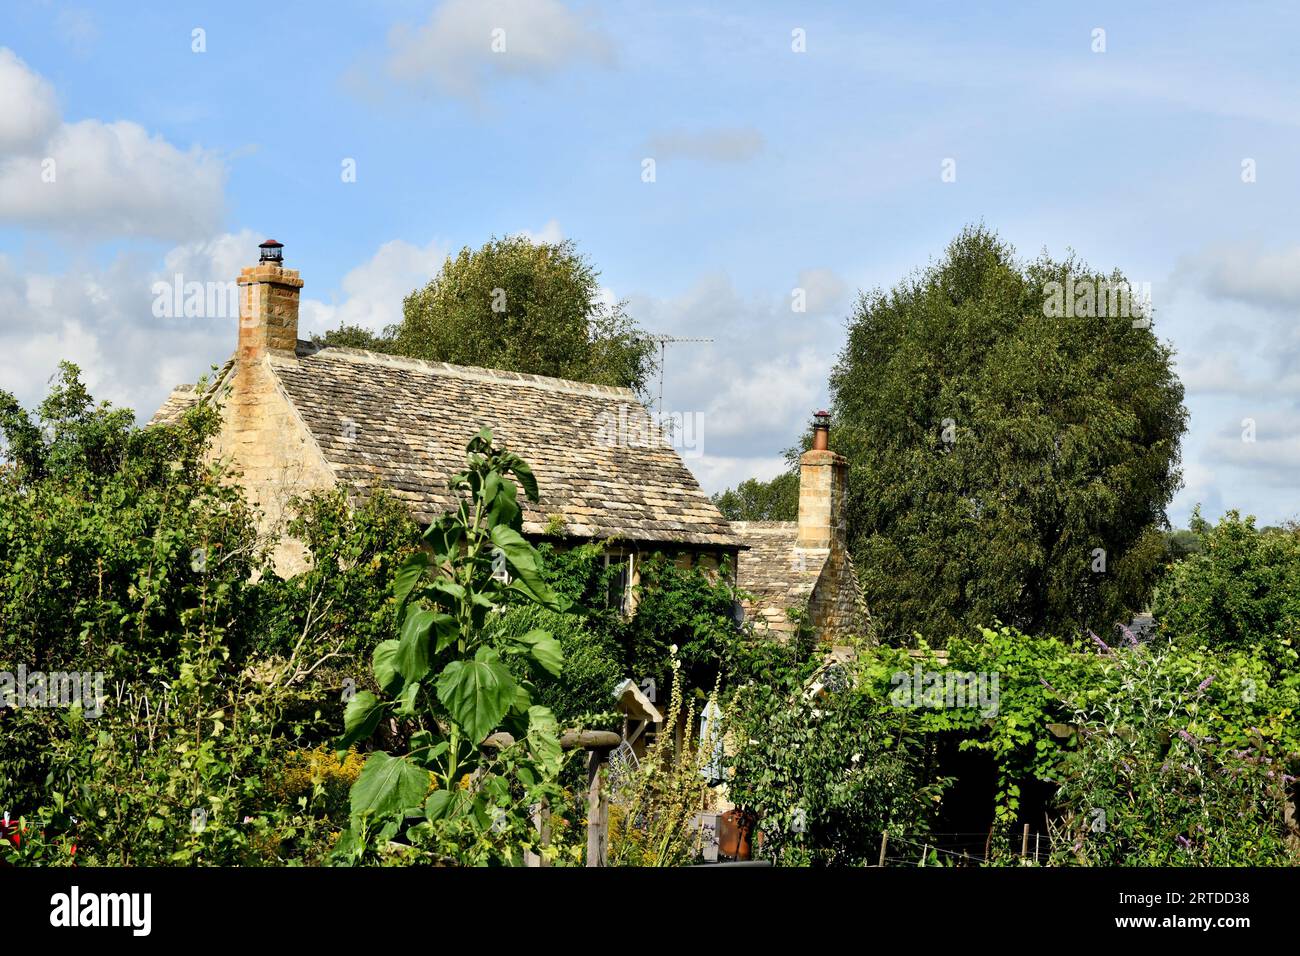 A beautiful stone cottage surrounded by a beautiful garden in the Cotswolds Village of Guiting Power on a bright sunny September day with blue sky Stock Photo